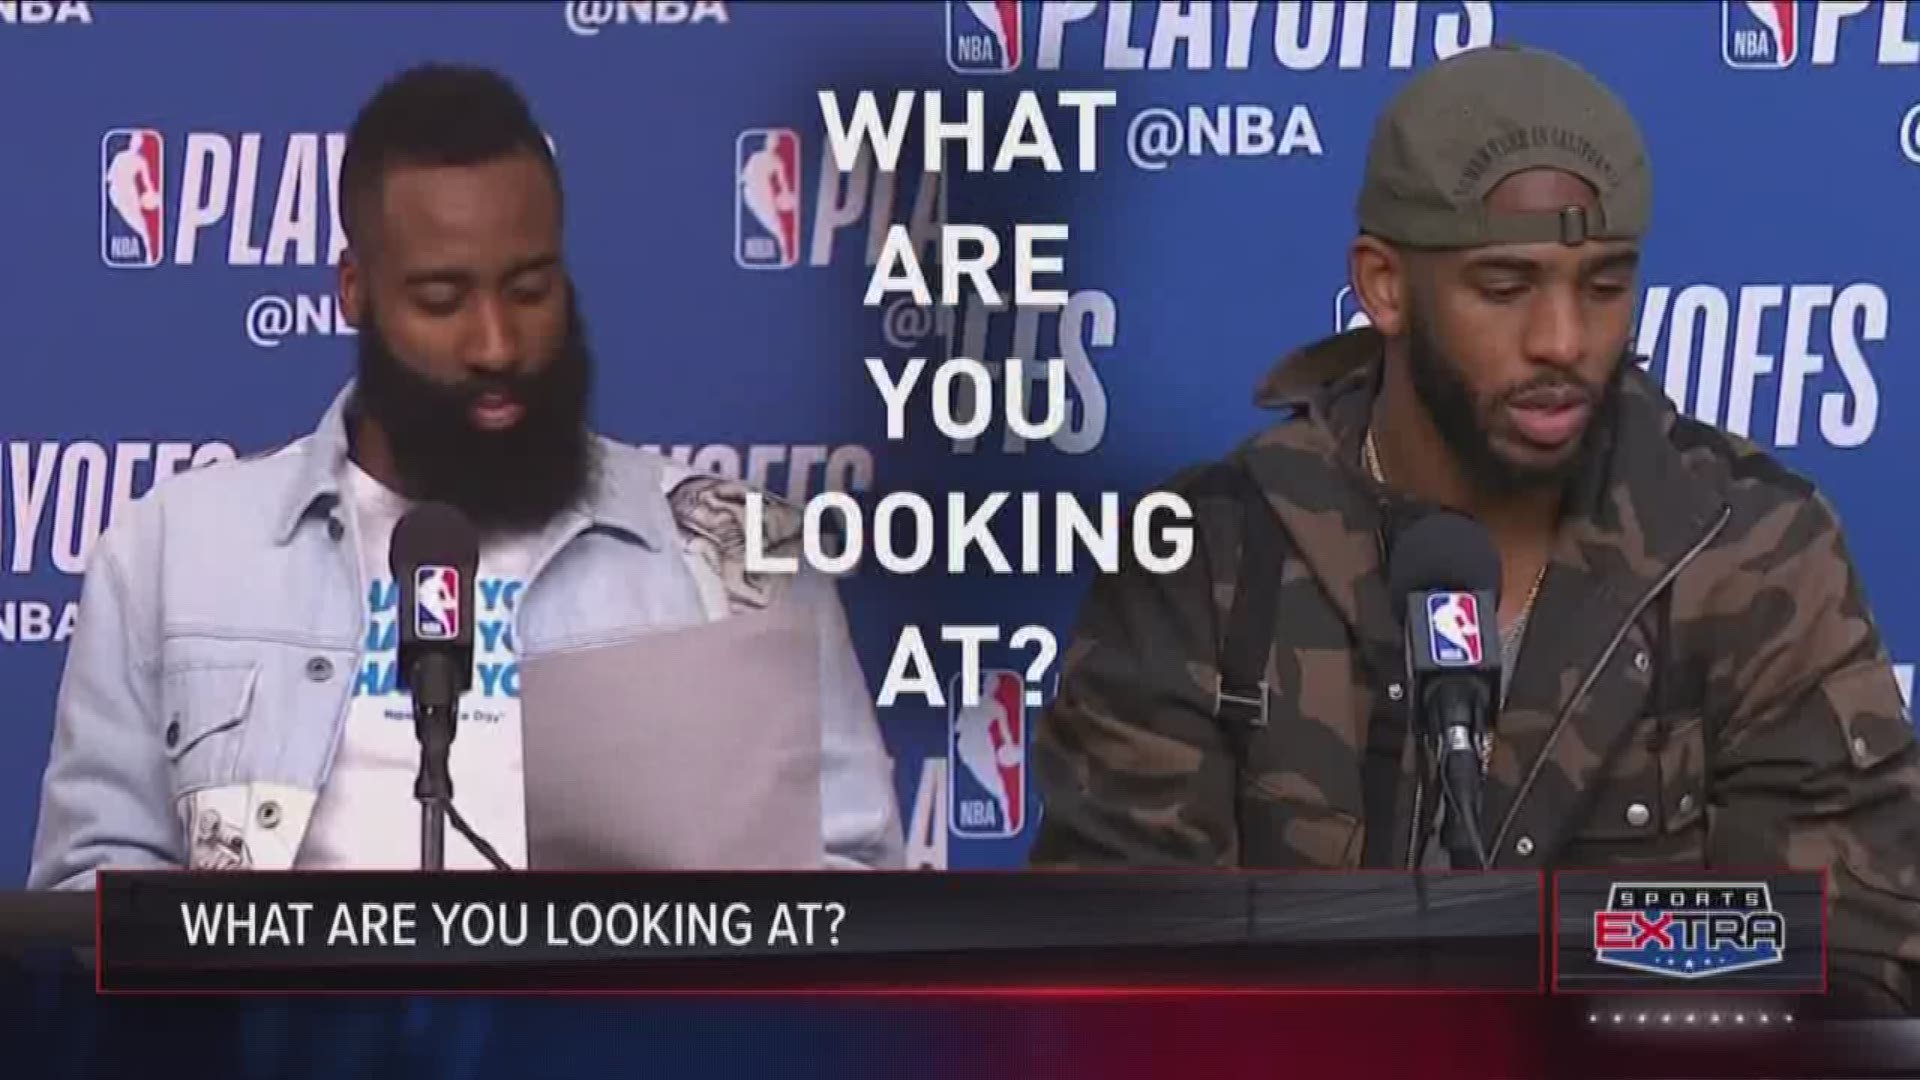 James Harden and Chris Paul both look long and hard at the stat sheet during postgame news conferences. We asked both James and Chris, "What are you looking at?"